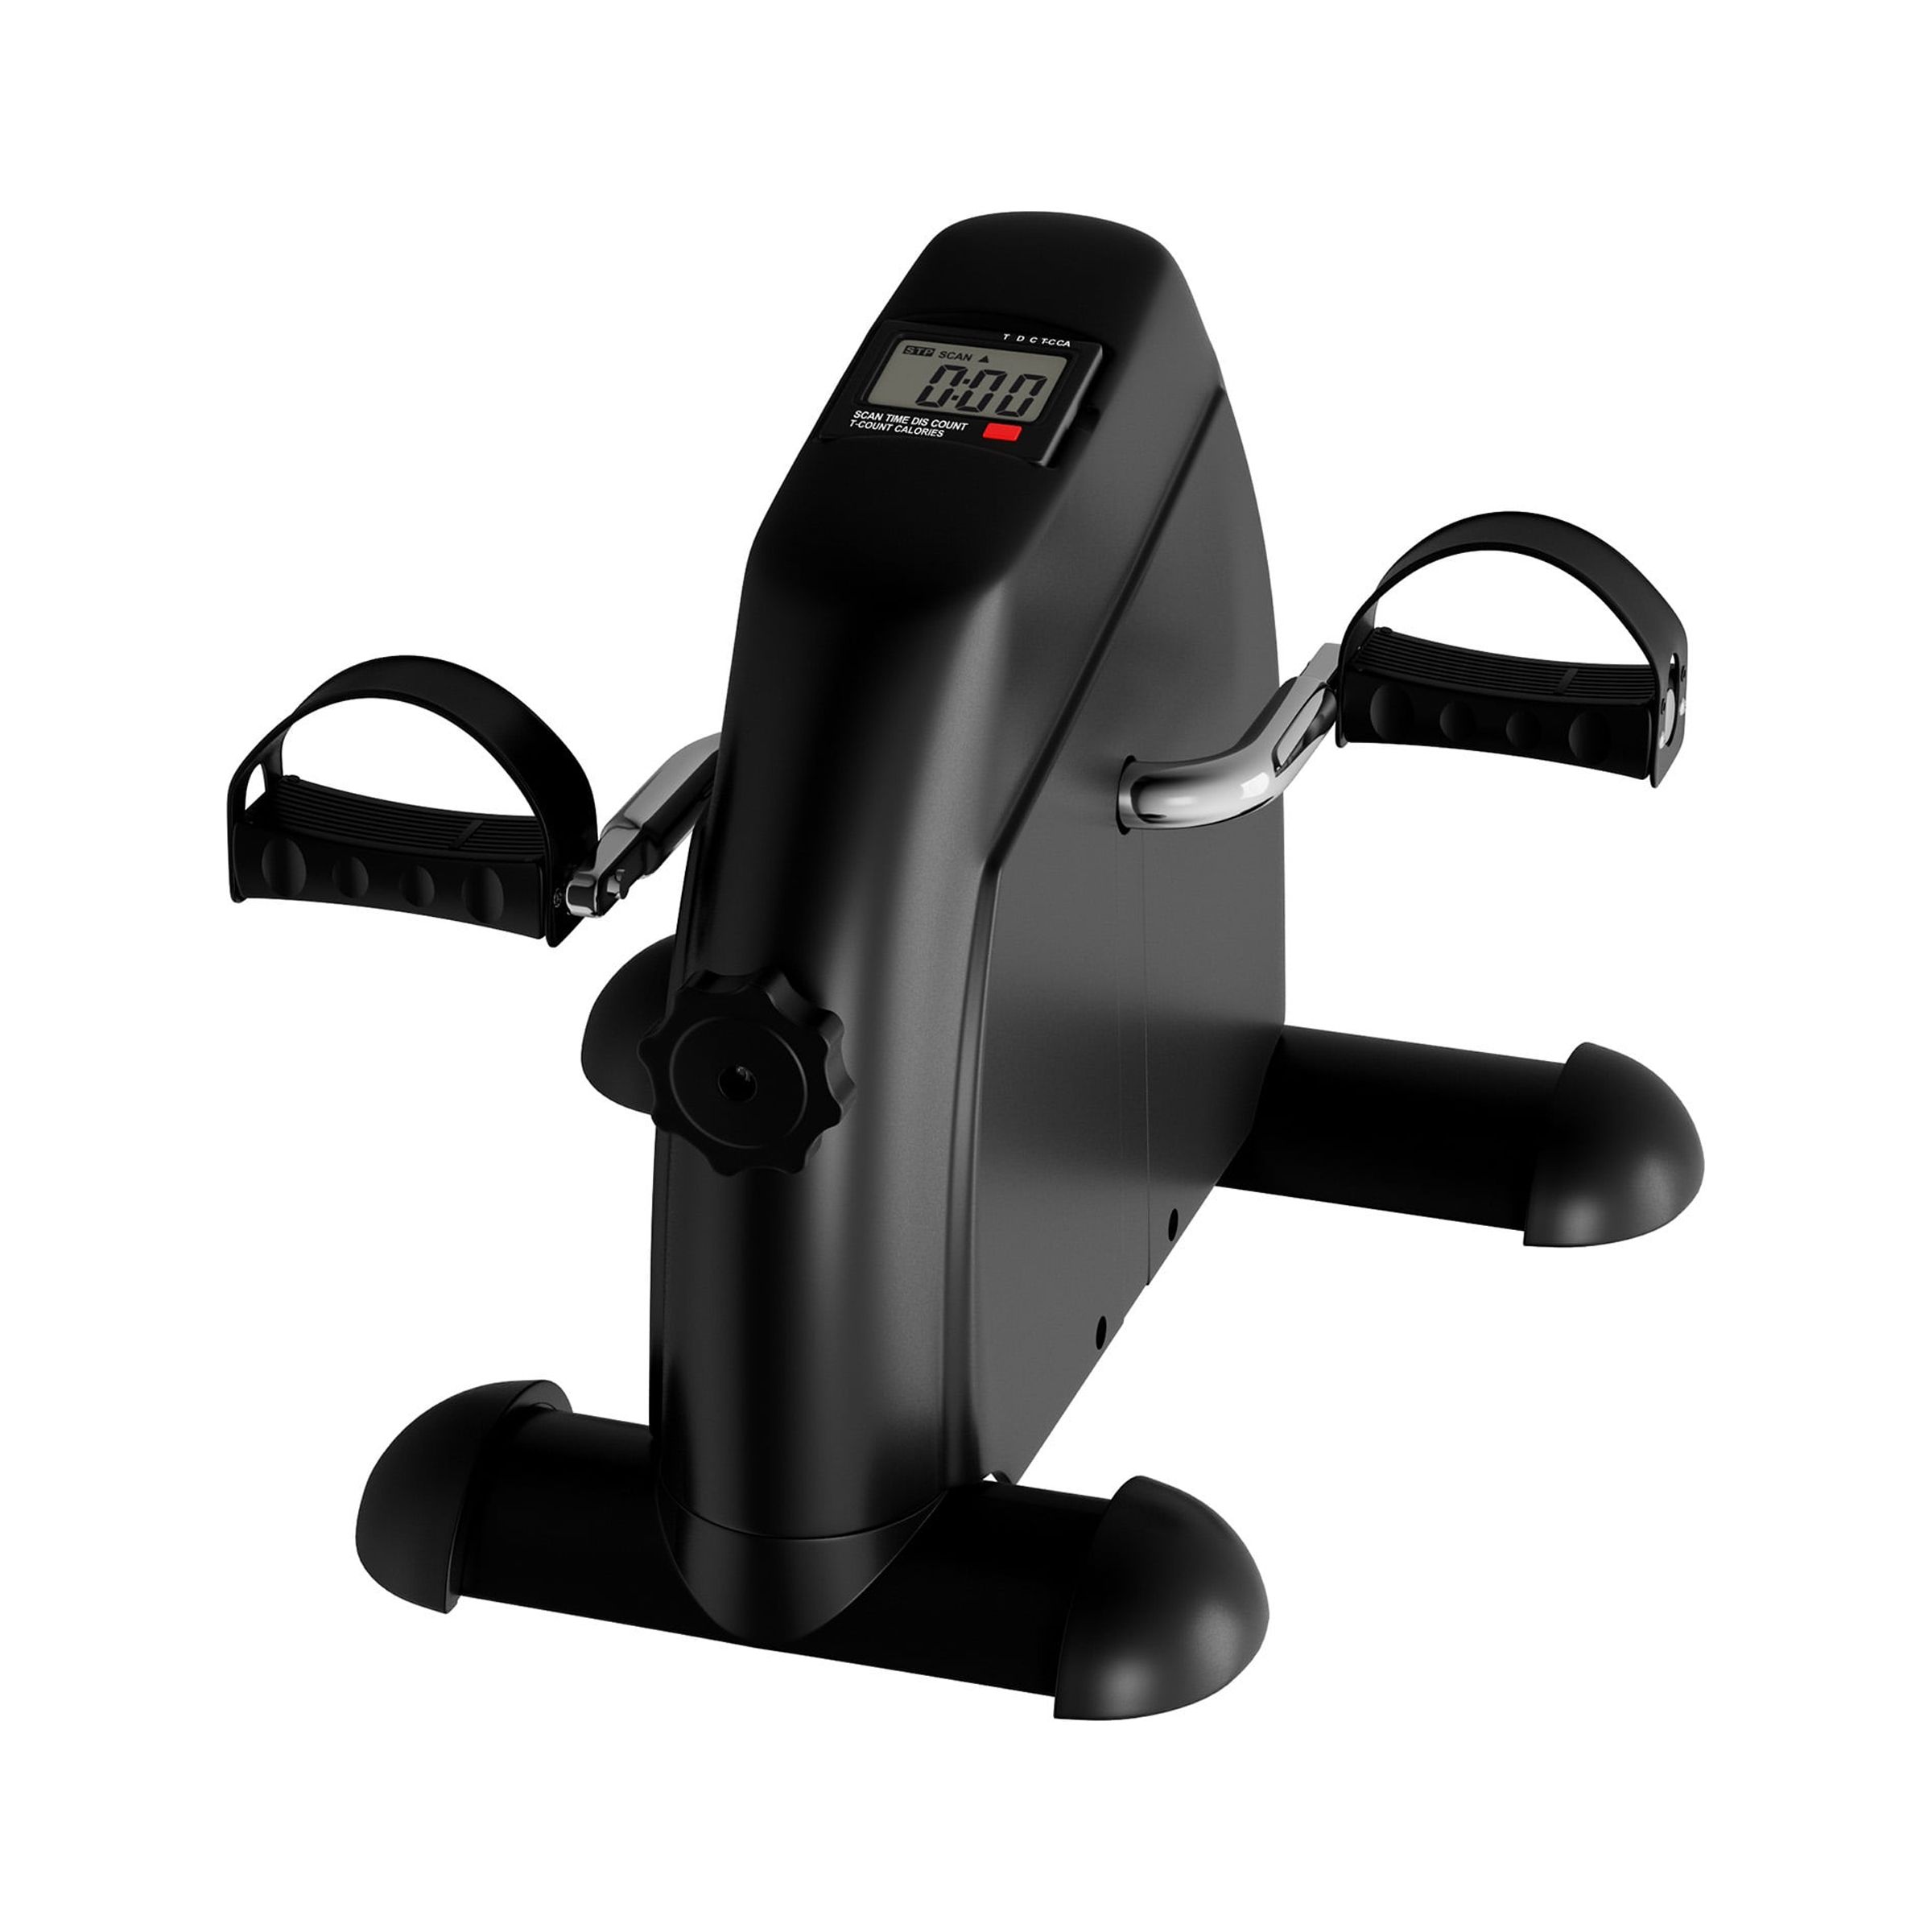 Wakeman Fitness Under Desk Bike and Pedal Exerciser with Calorie Counter - image 1 of 8